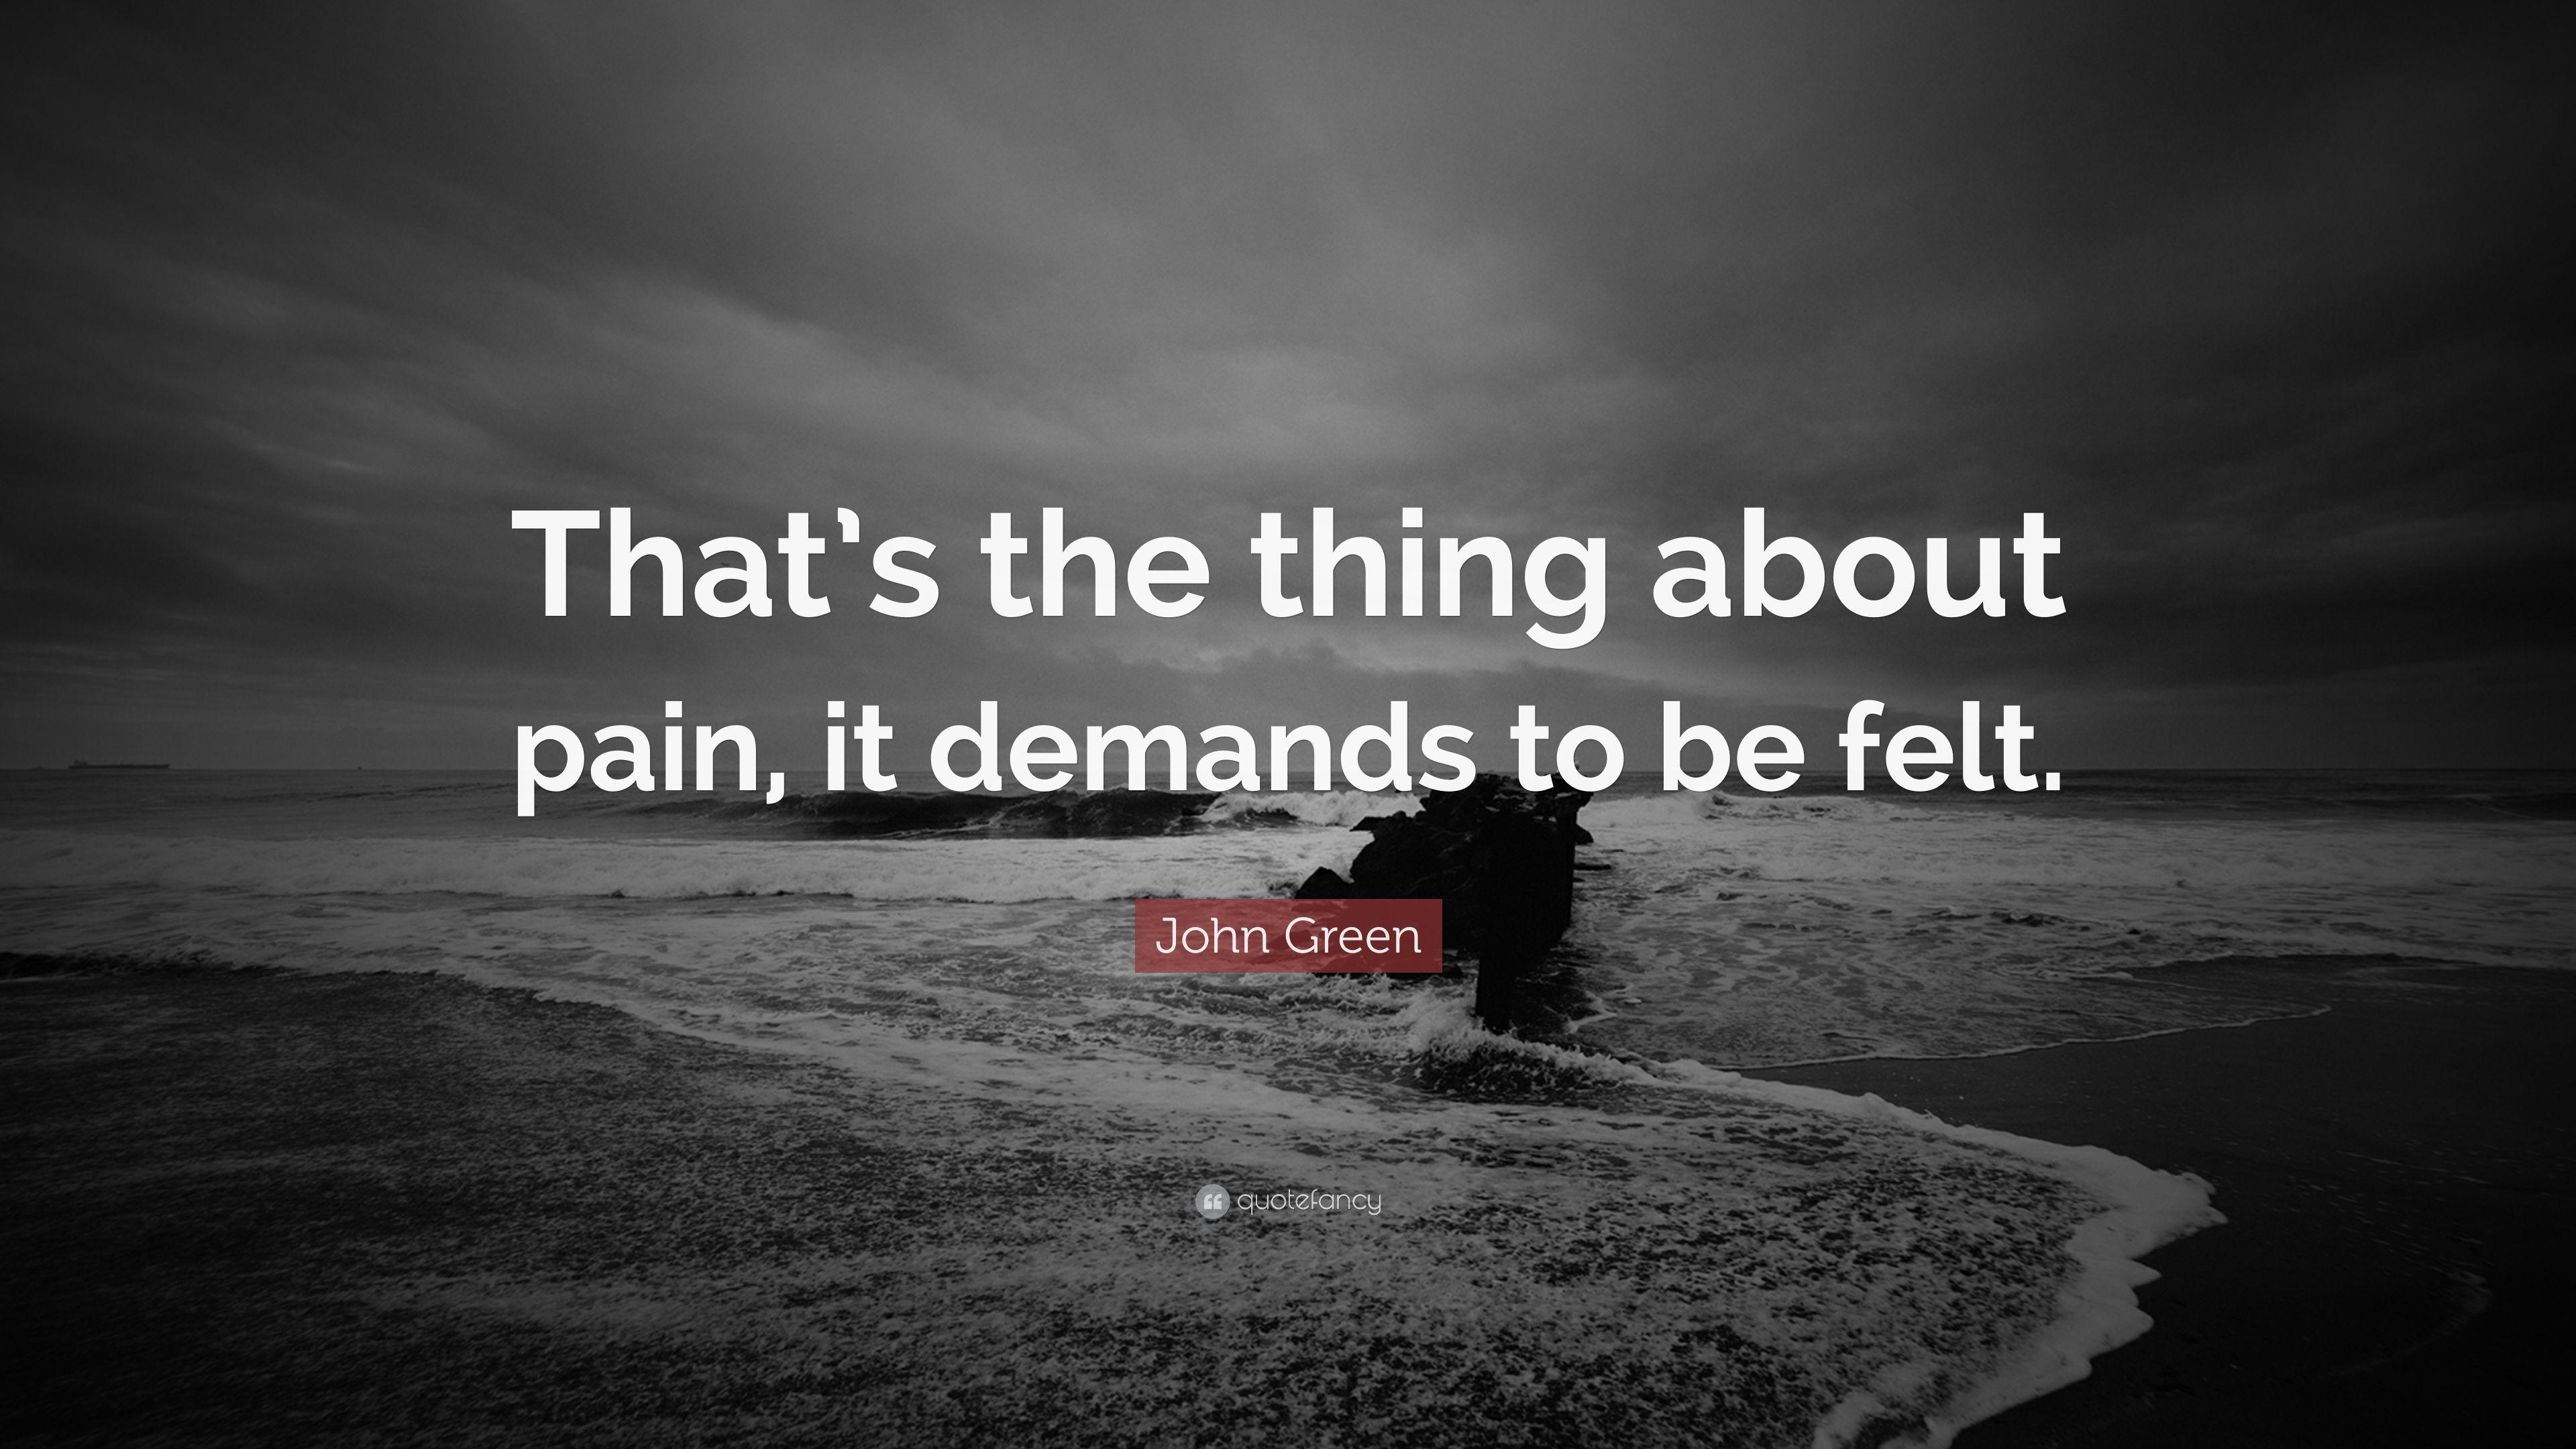 John Green Quote: "That's the thing about pain, it demands 